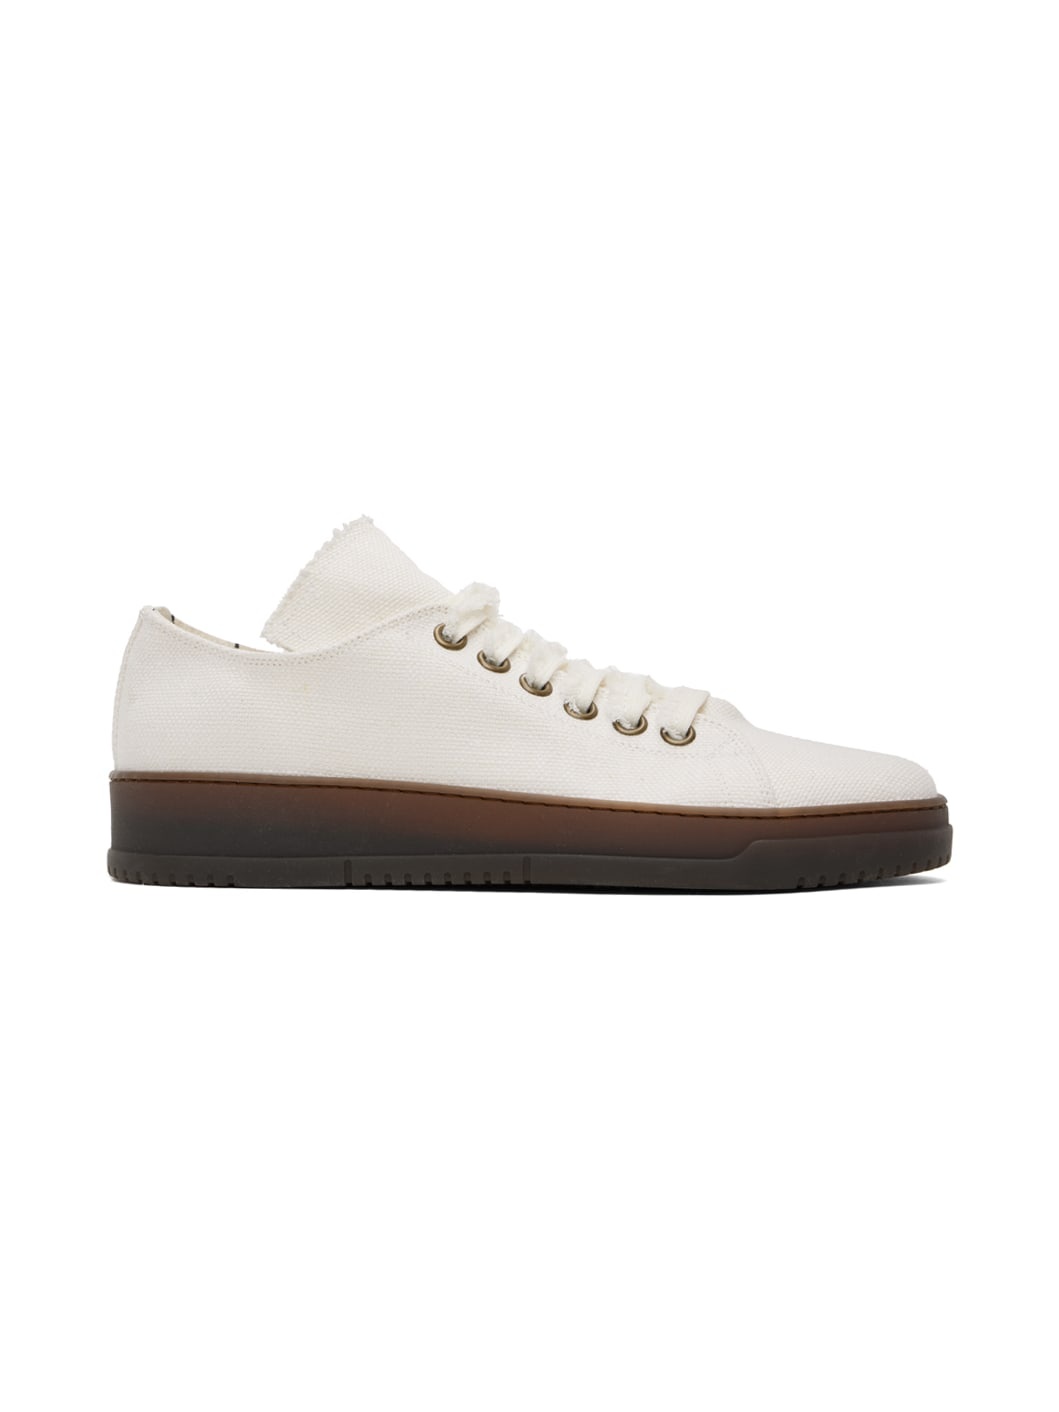 Off-White Tennis Sneakers - 1